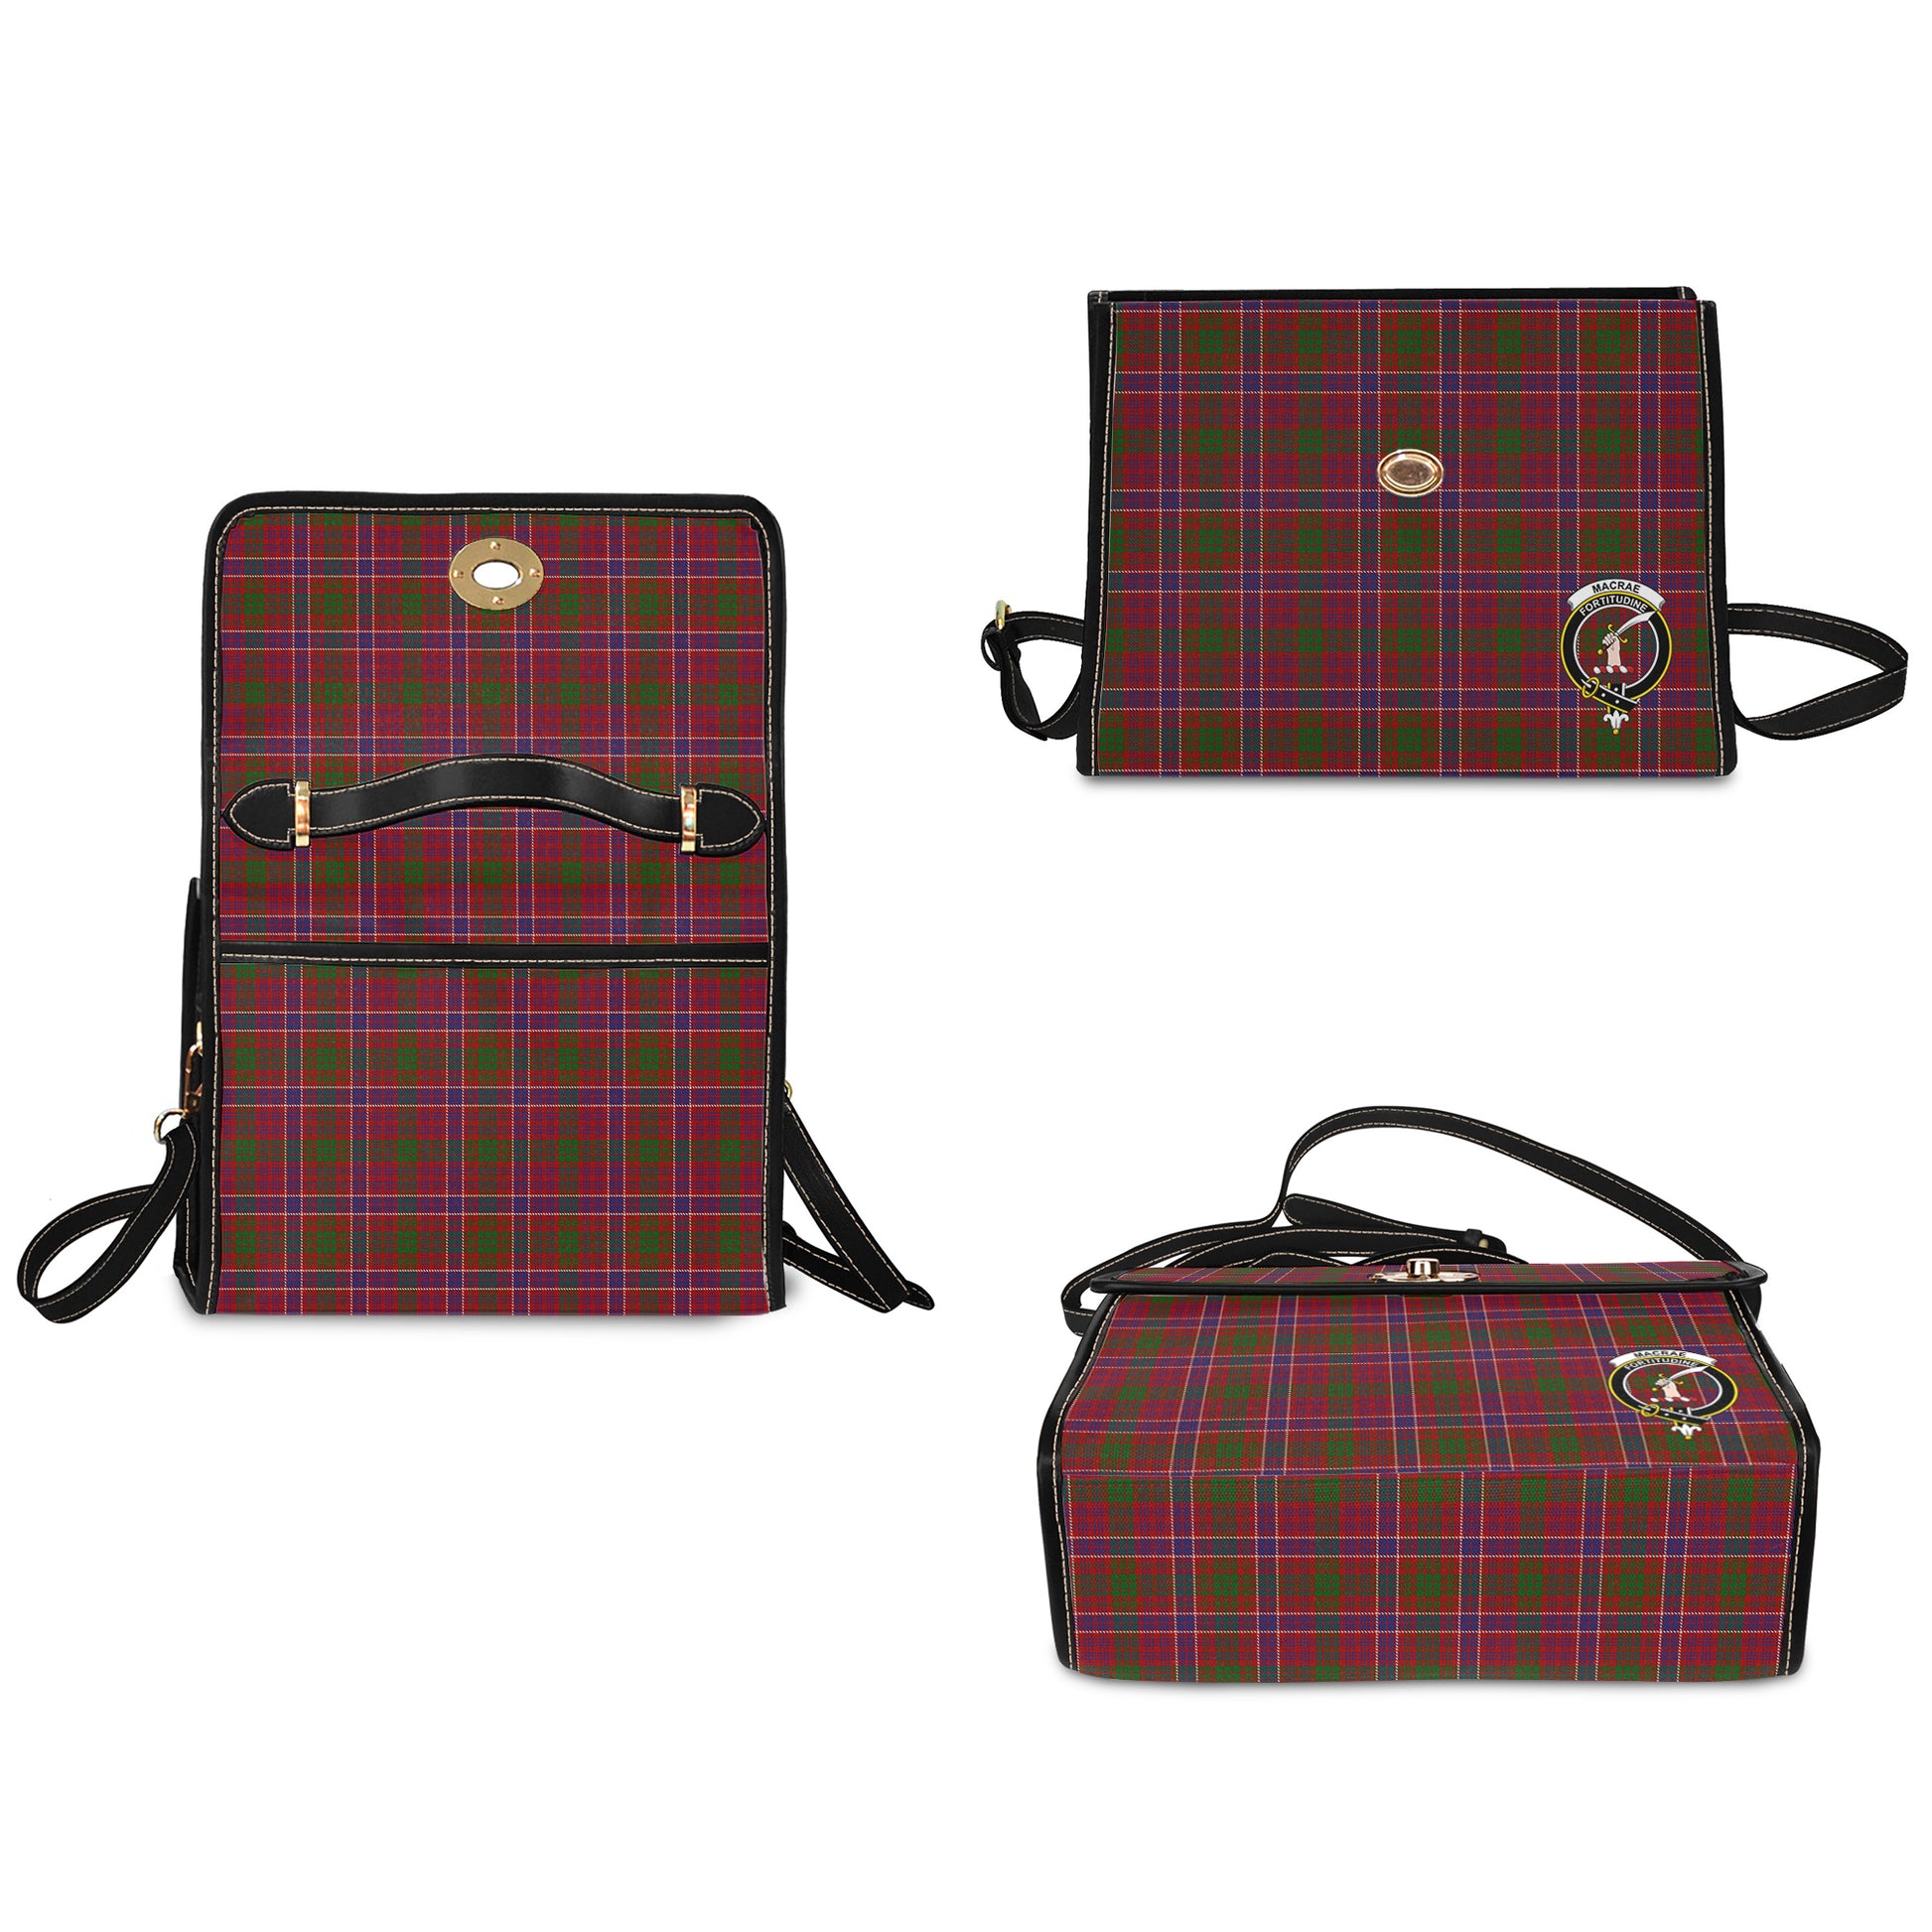 macrae-red-tartan-leather-strap-waterproof-canvas-bag-with-family-crest